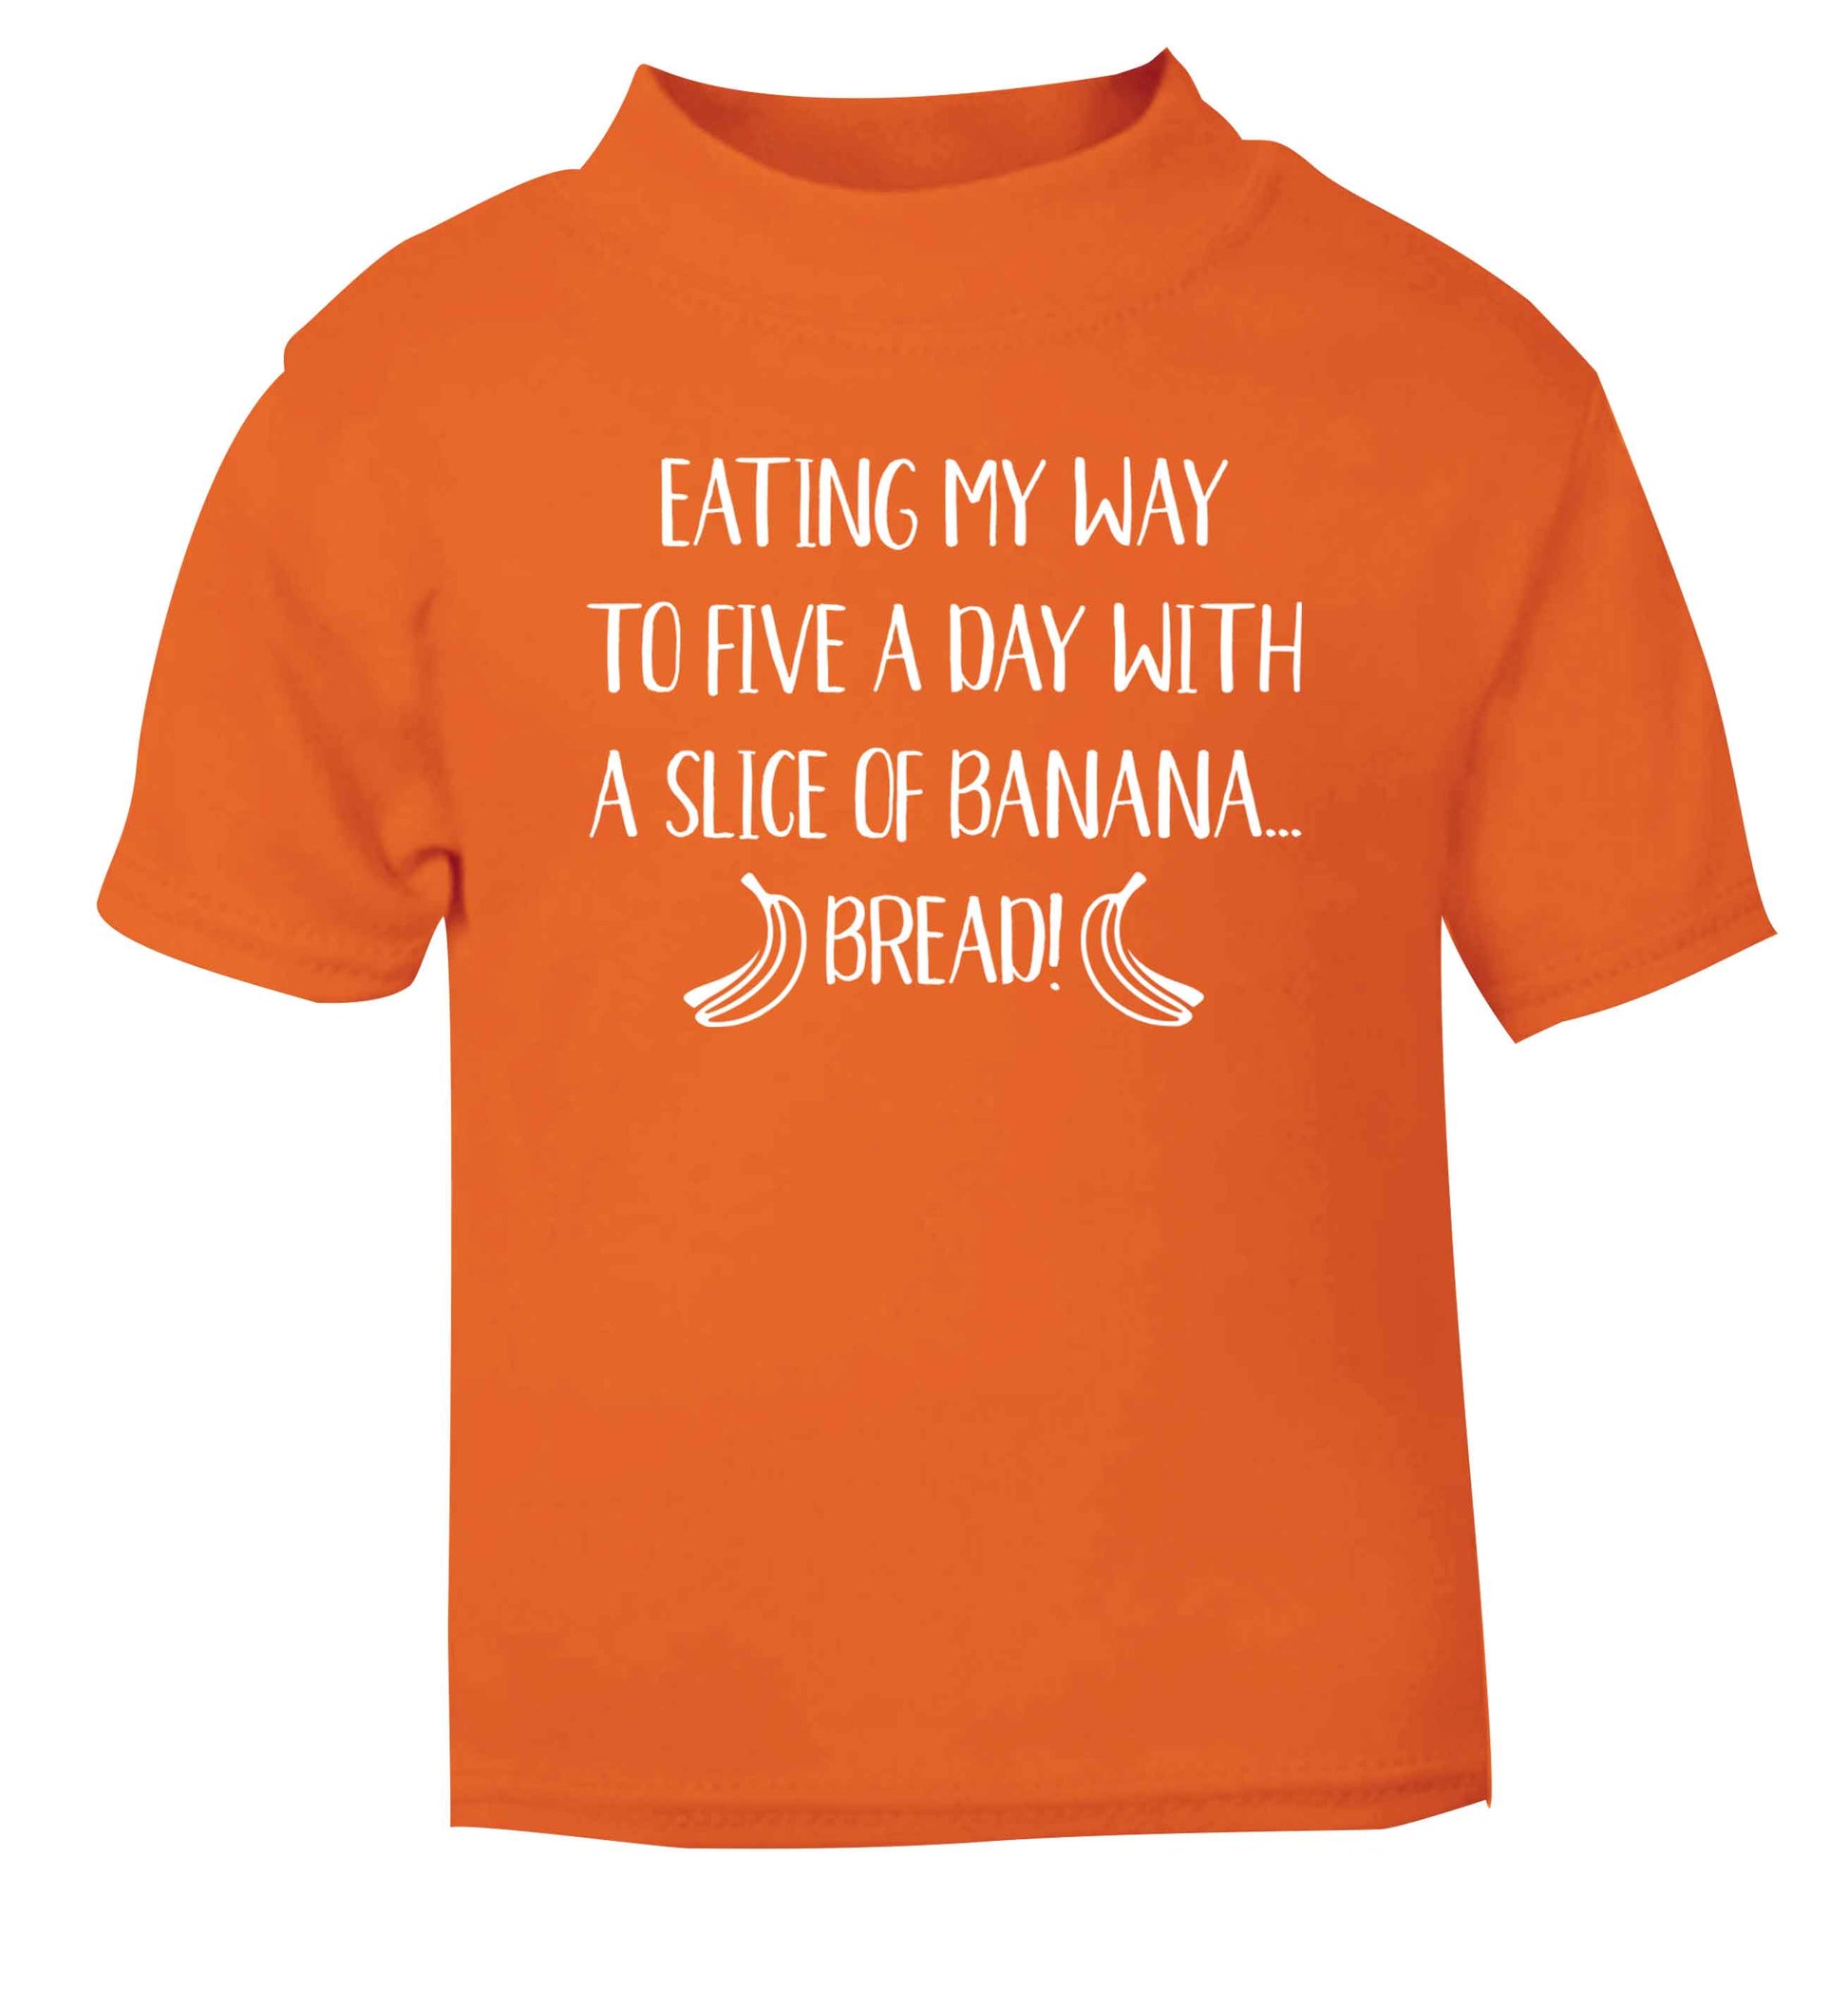 Eating my way to five a day with a slice of banana bread orange Baby Toddler Tshirt 2 Years